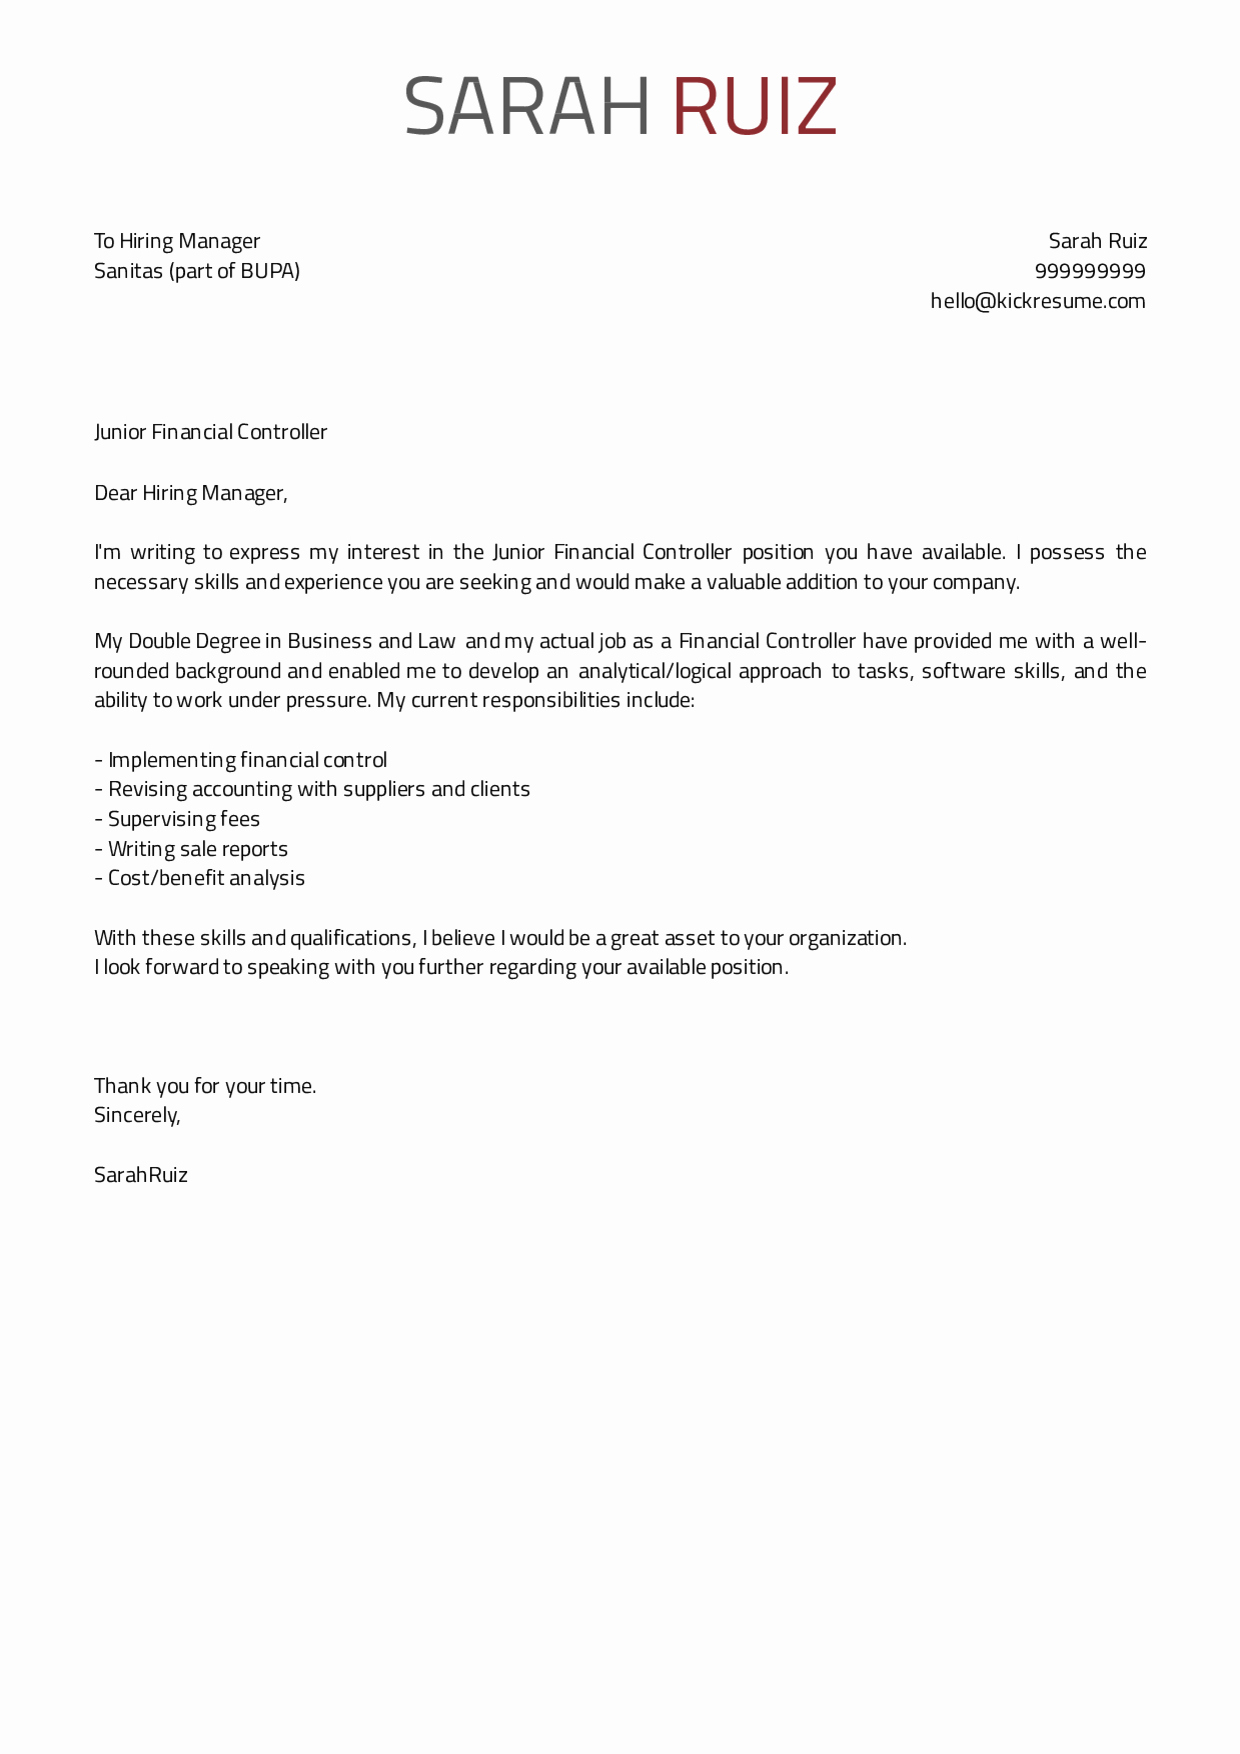 junior financial controller bupa cover letter sample